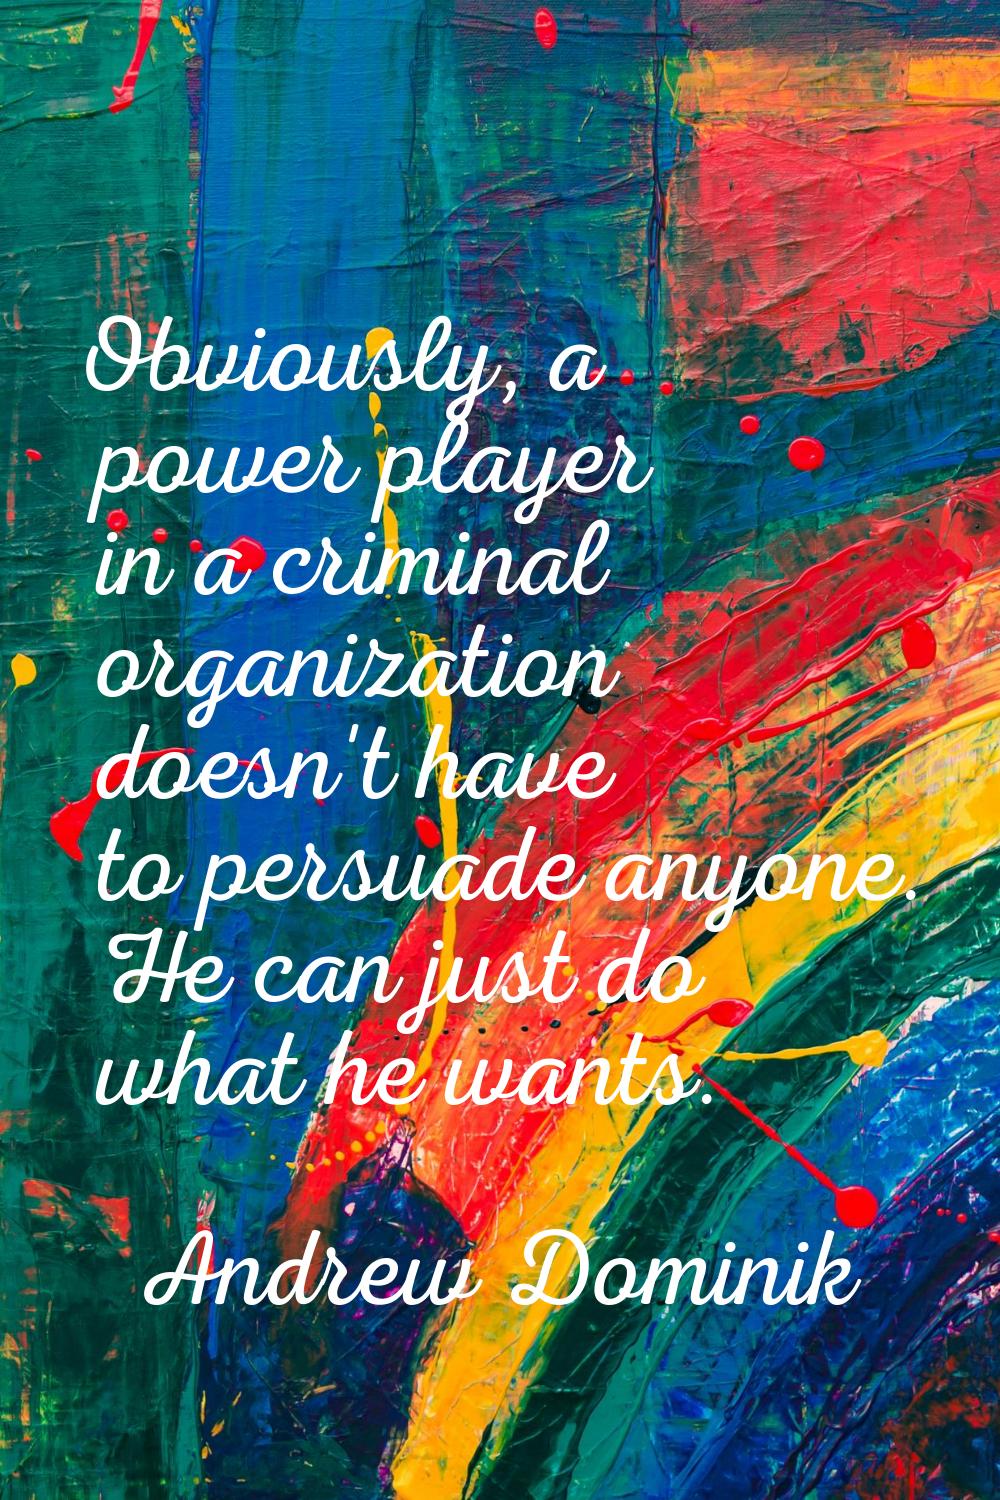 Obviously, a power player in a criminal organization doesn't have to persuade anyone. He can just d